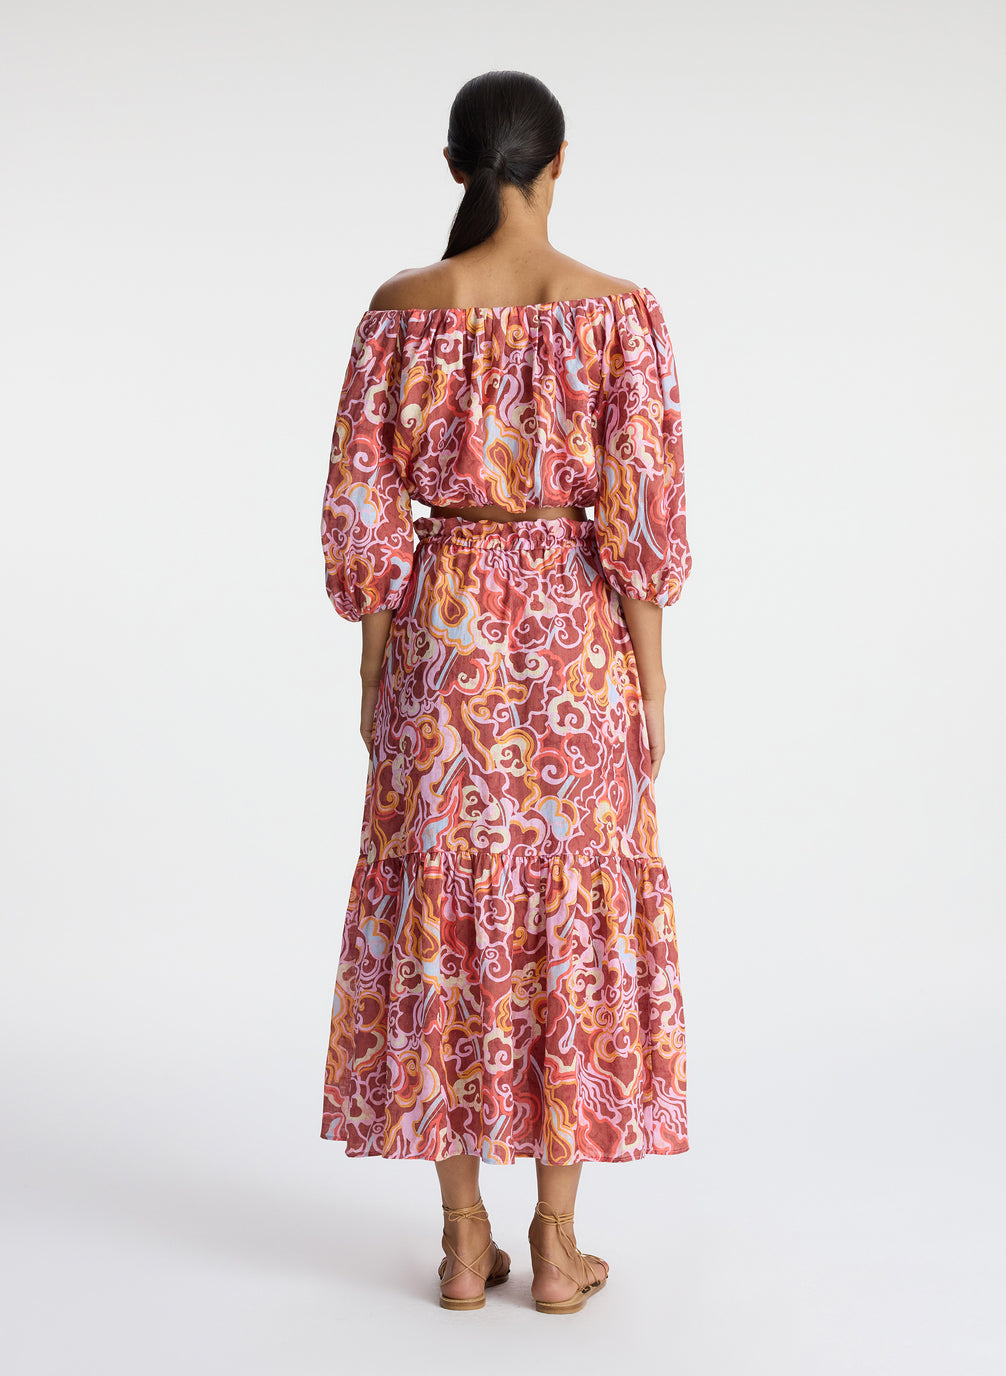 back view of woman wearing off shoulder printed linen top and matching midi skirt